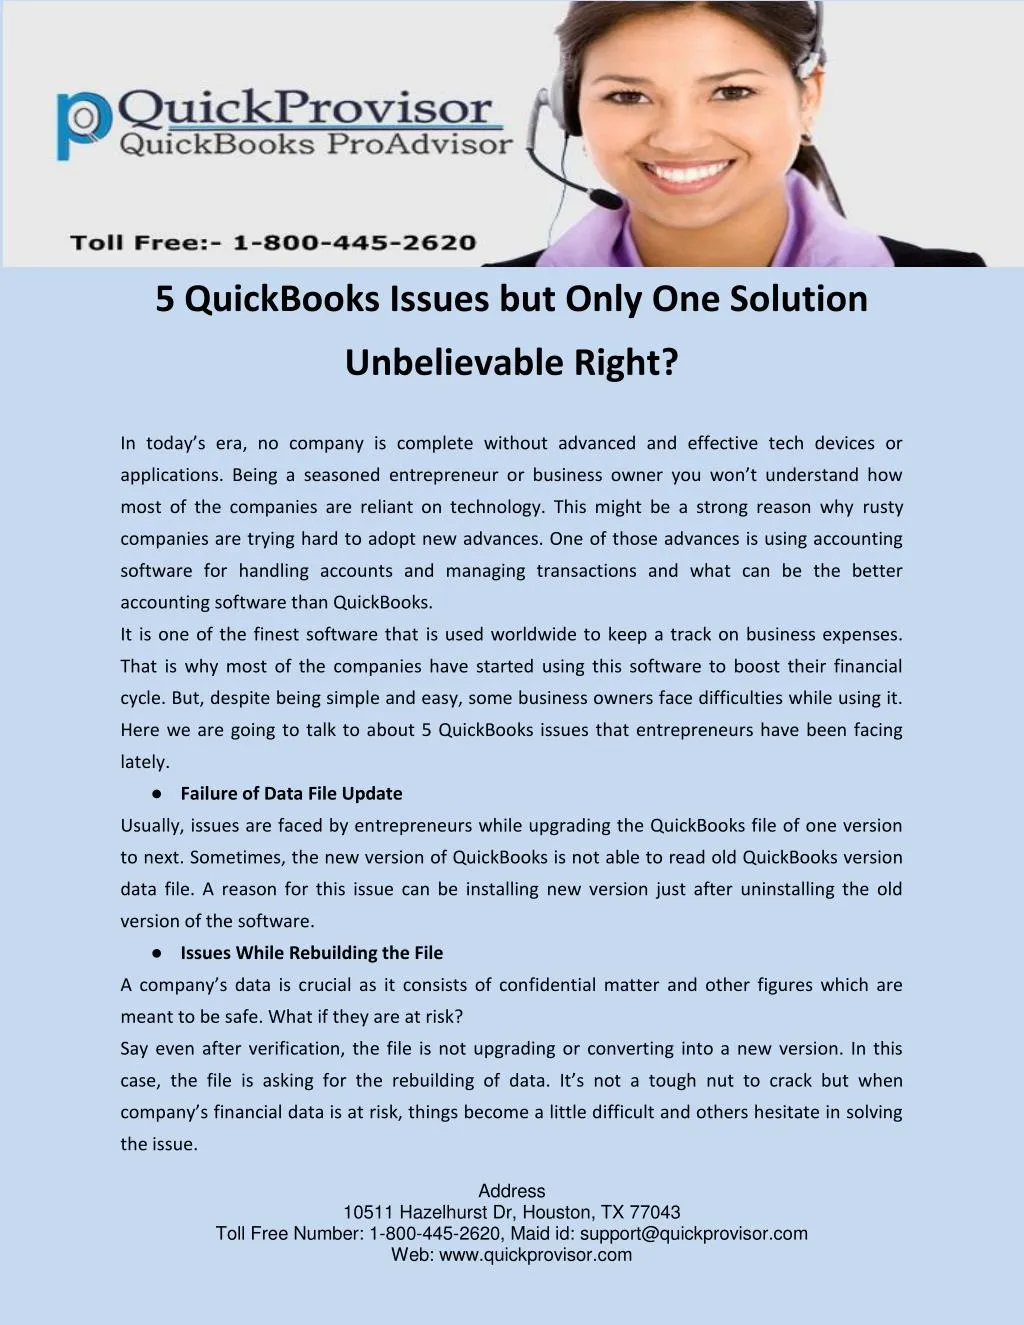 5 quickbooks issues but only one solution